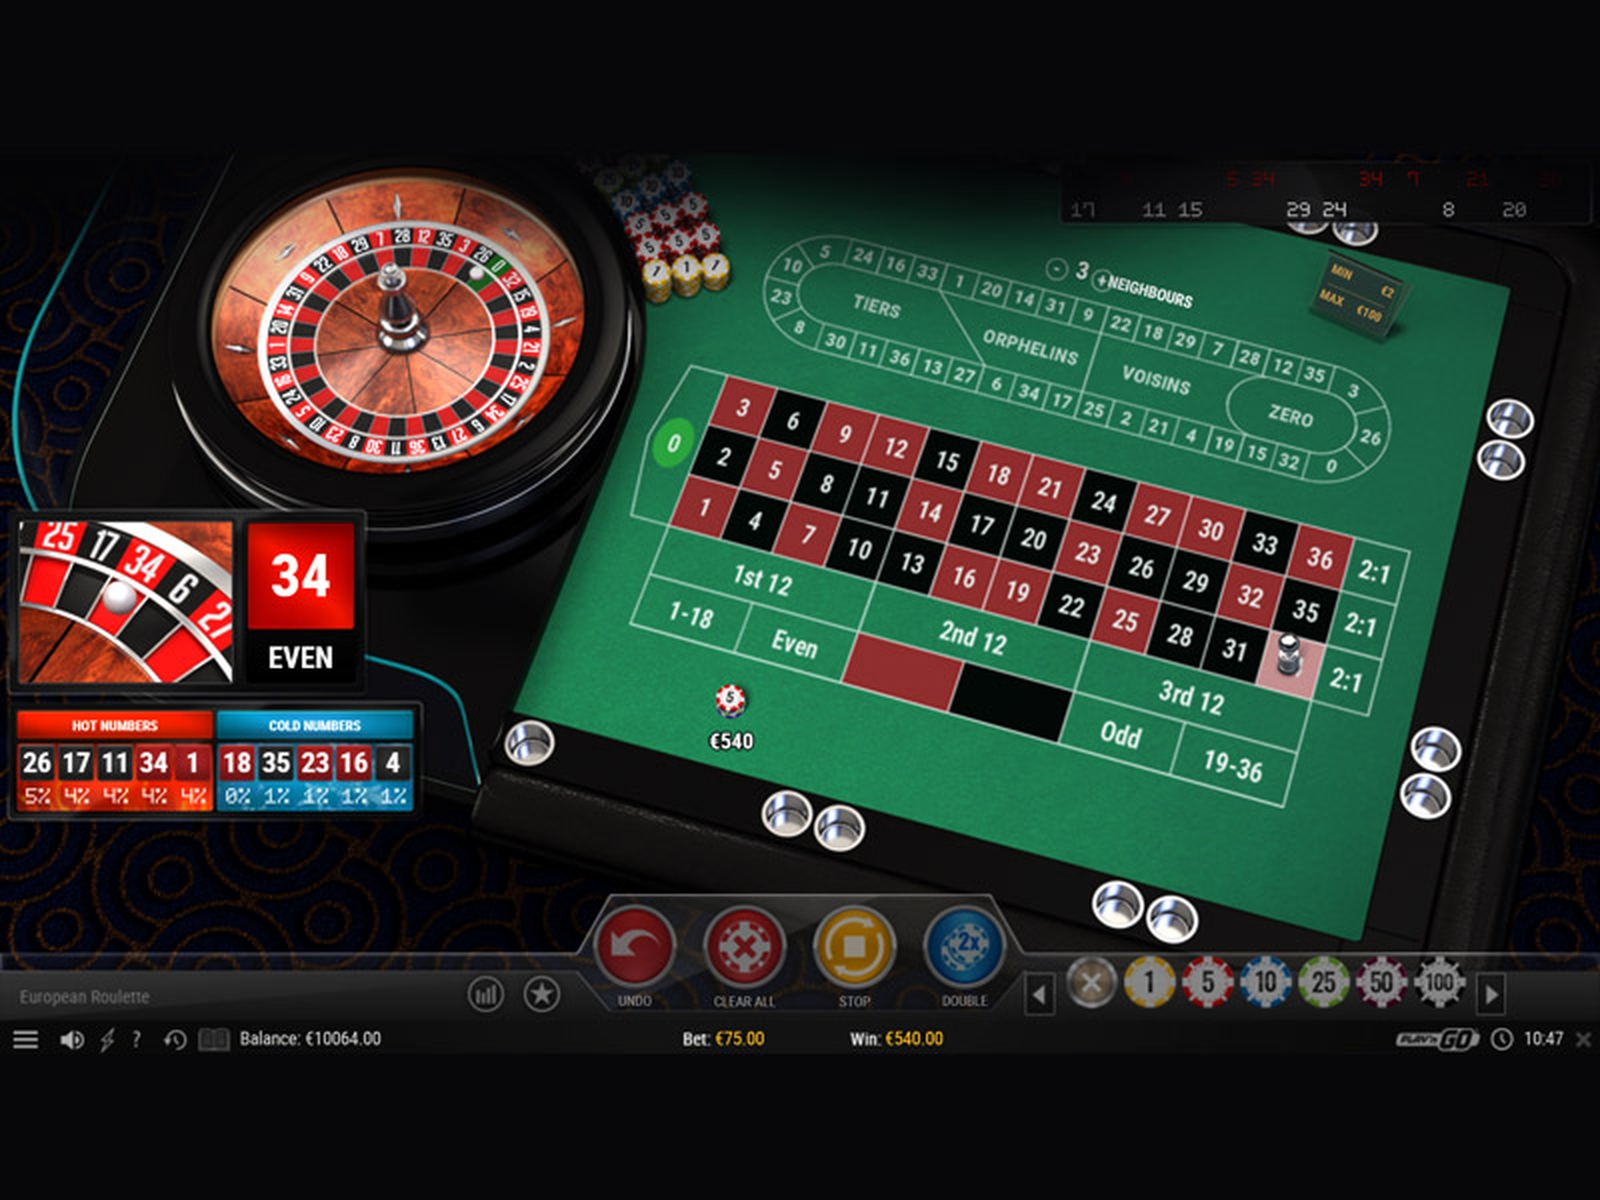 The European Roulette Online Slot Demo Game by Top Trend Gaming